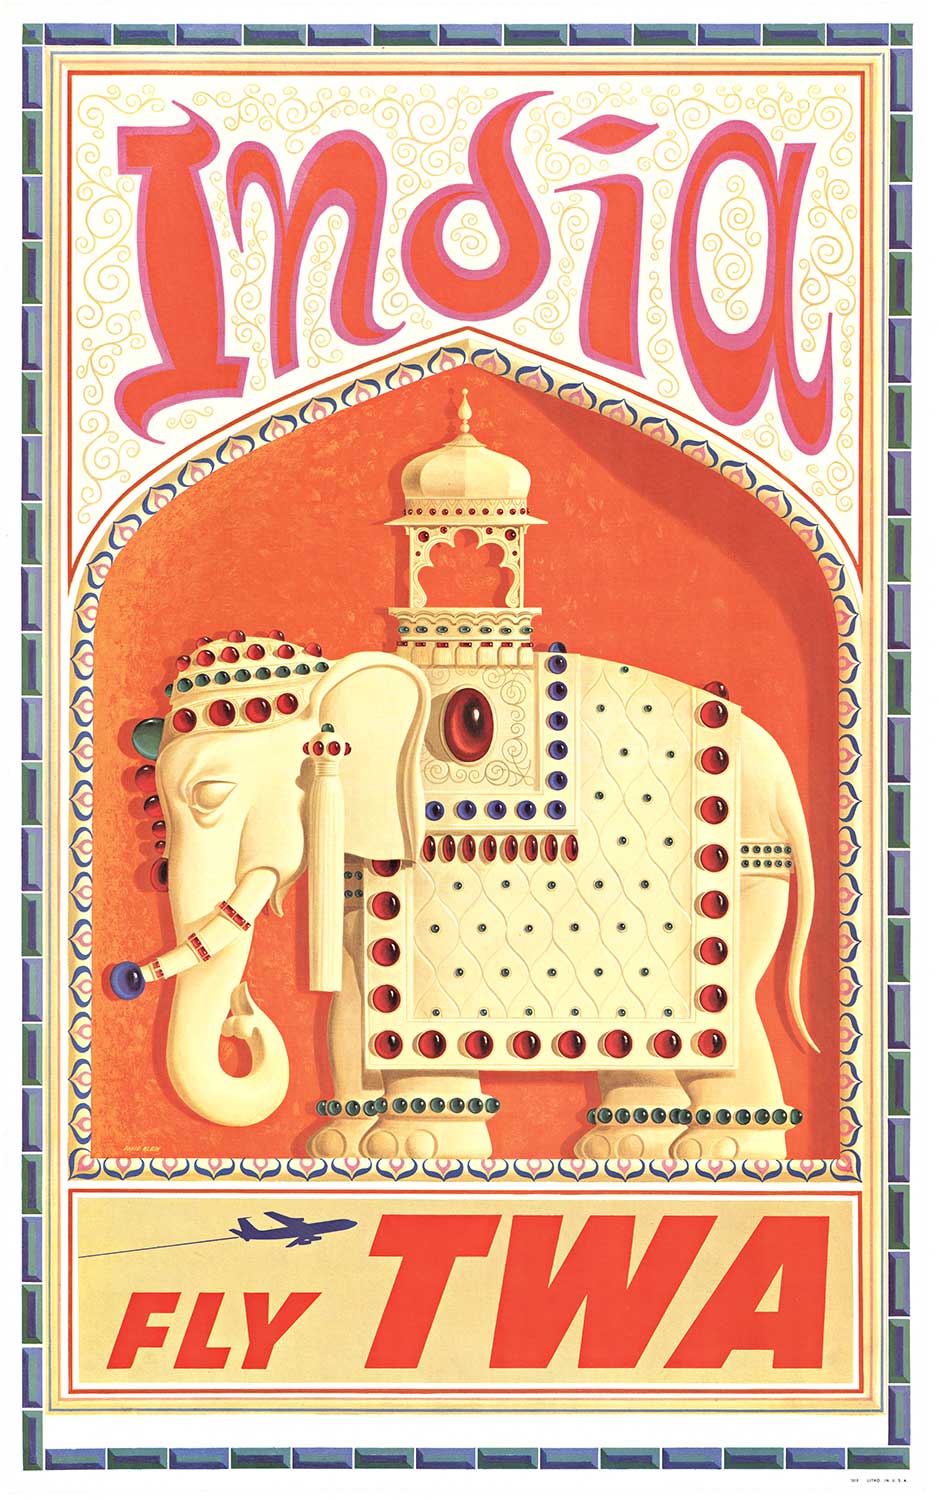 Original Fly TWA India vintage travel poster. Artist: David Klein. Archival linen backed in very fine condition, ready to frame. <br> <br>This poster features an elephant adorned in jewels with a howdah on the top for the passenger. The elephant